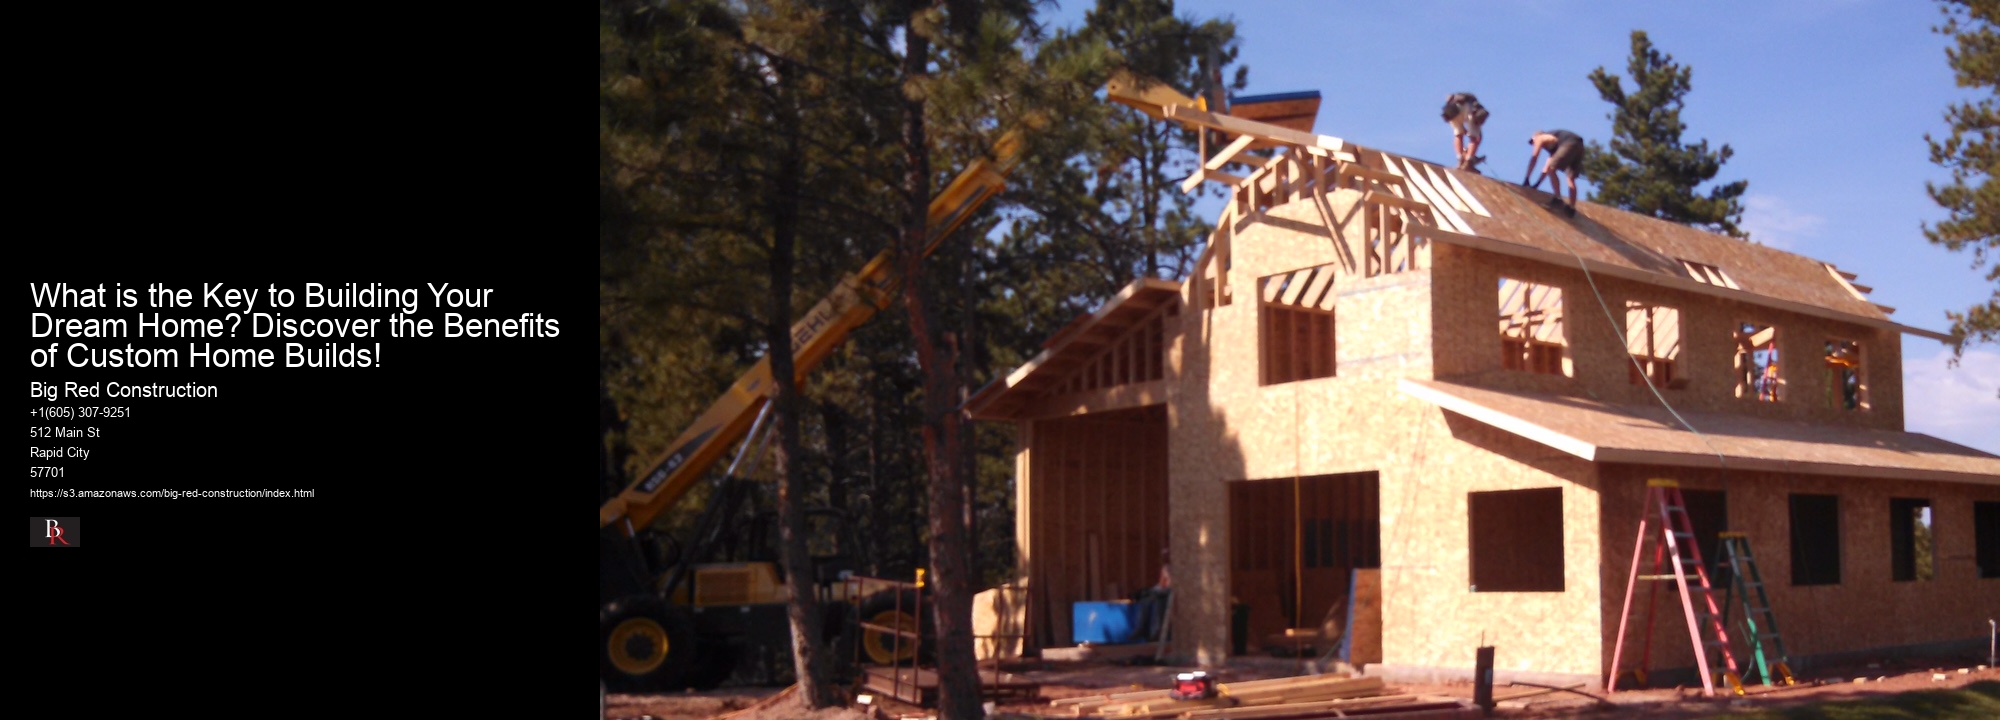 What is the Key to Building Your Dream Home? Discover the Benefits of Custom Home Builds!